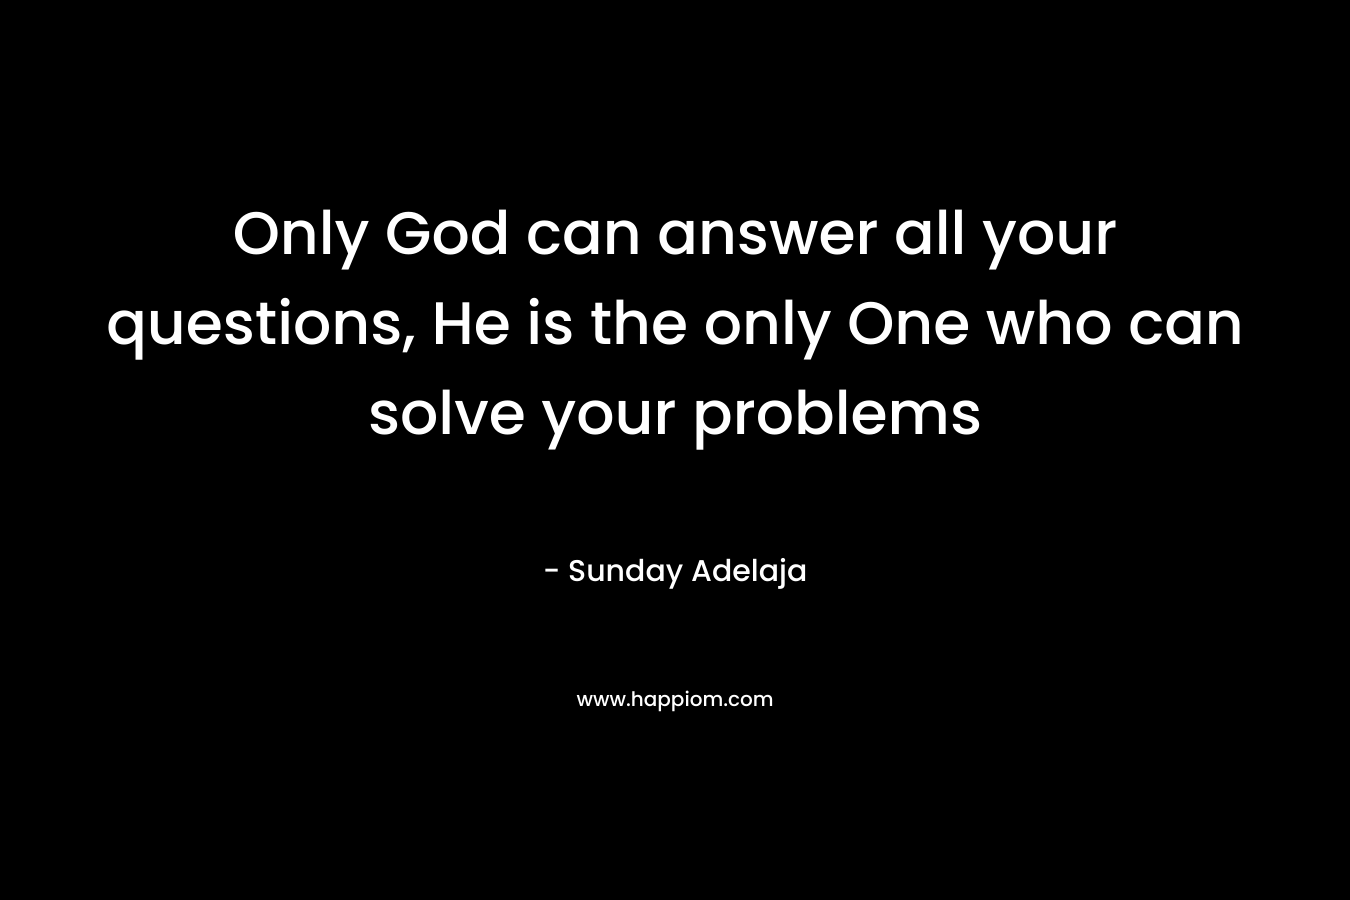 Only God can answer all your questions, He is the only One who can solve your problems – Sunday Adelaja